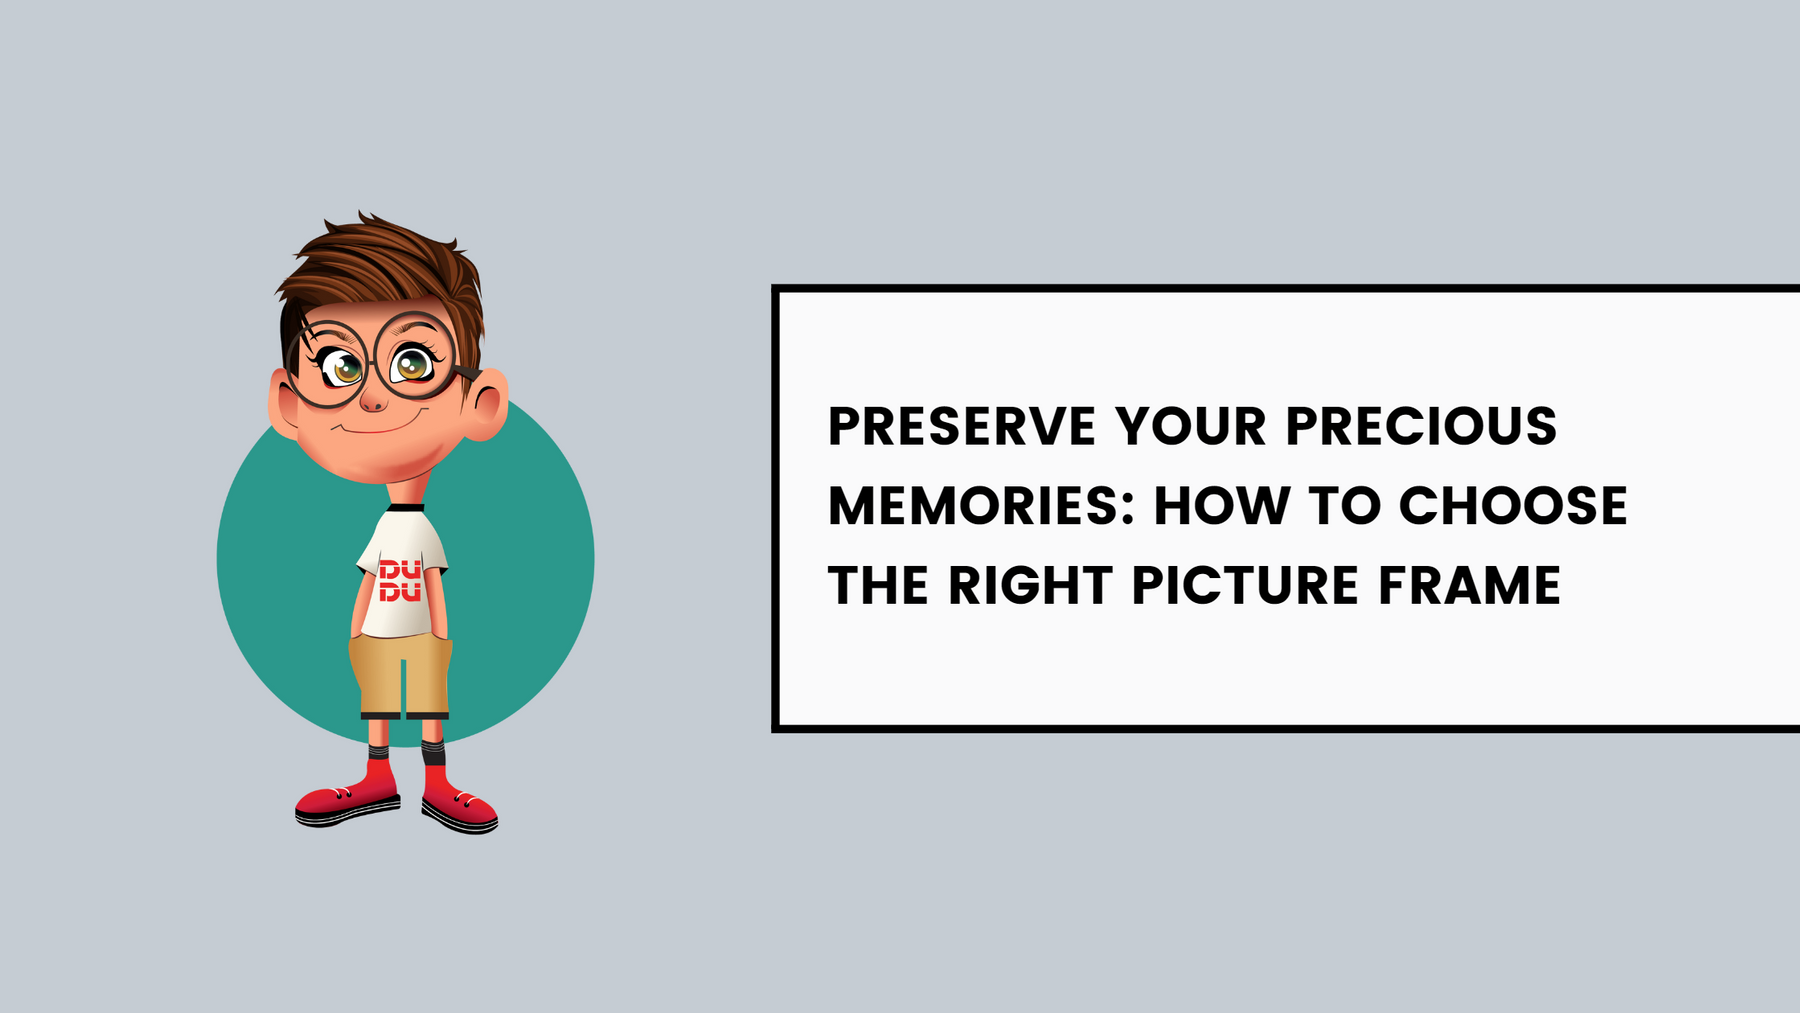 Preserve Your Precious Memories: How to Choose the Right Picture Frame